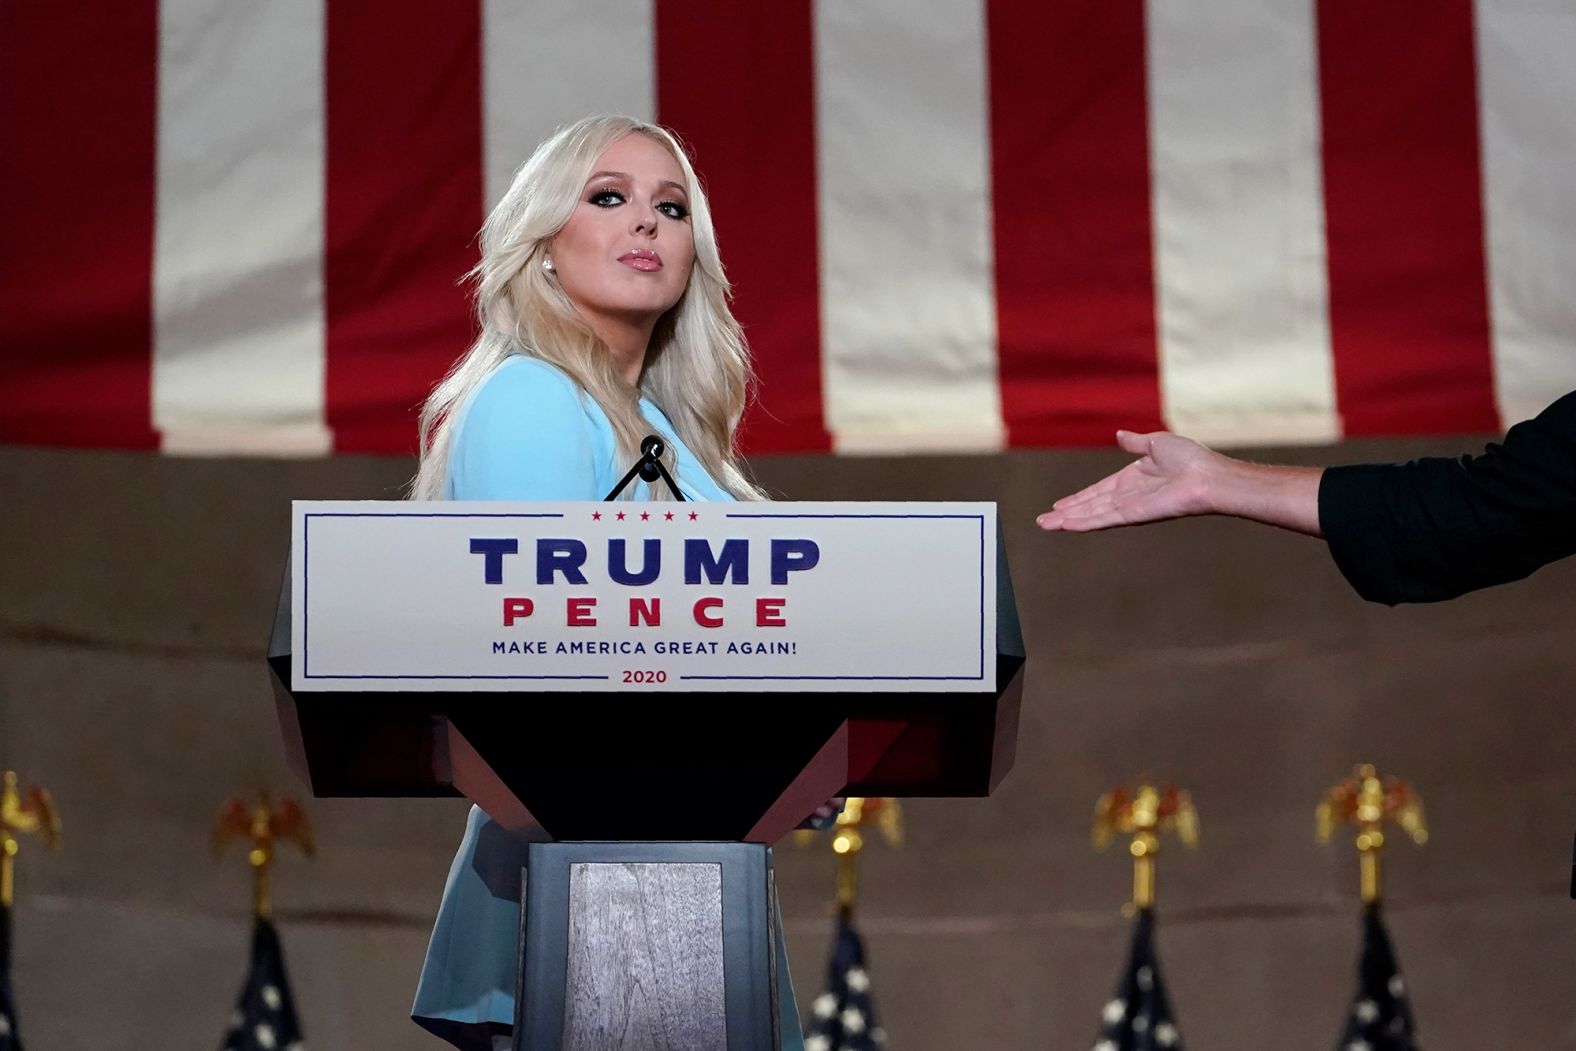 Trump's youngest daughter, Tiffany, spoke Tuesday, making an appeal to young Americans to <a href="https://www.cnn.com/politics/live-news/rnc-2020-day-2/h_51e1bdff4c318b950a42f9f50cc7bd68" target="_blank">"transcend political boundaries"</a> as they cast their ballots in the November election. "I urge you to make your judgment based on results and not rhetoric," she said.